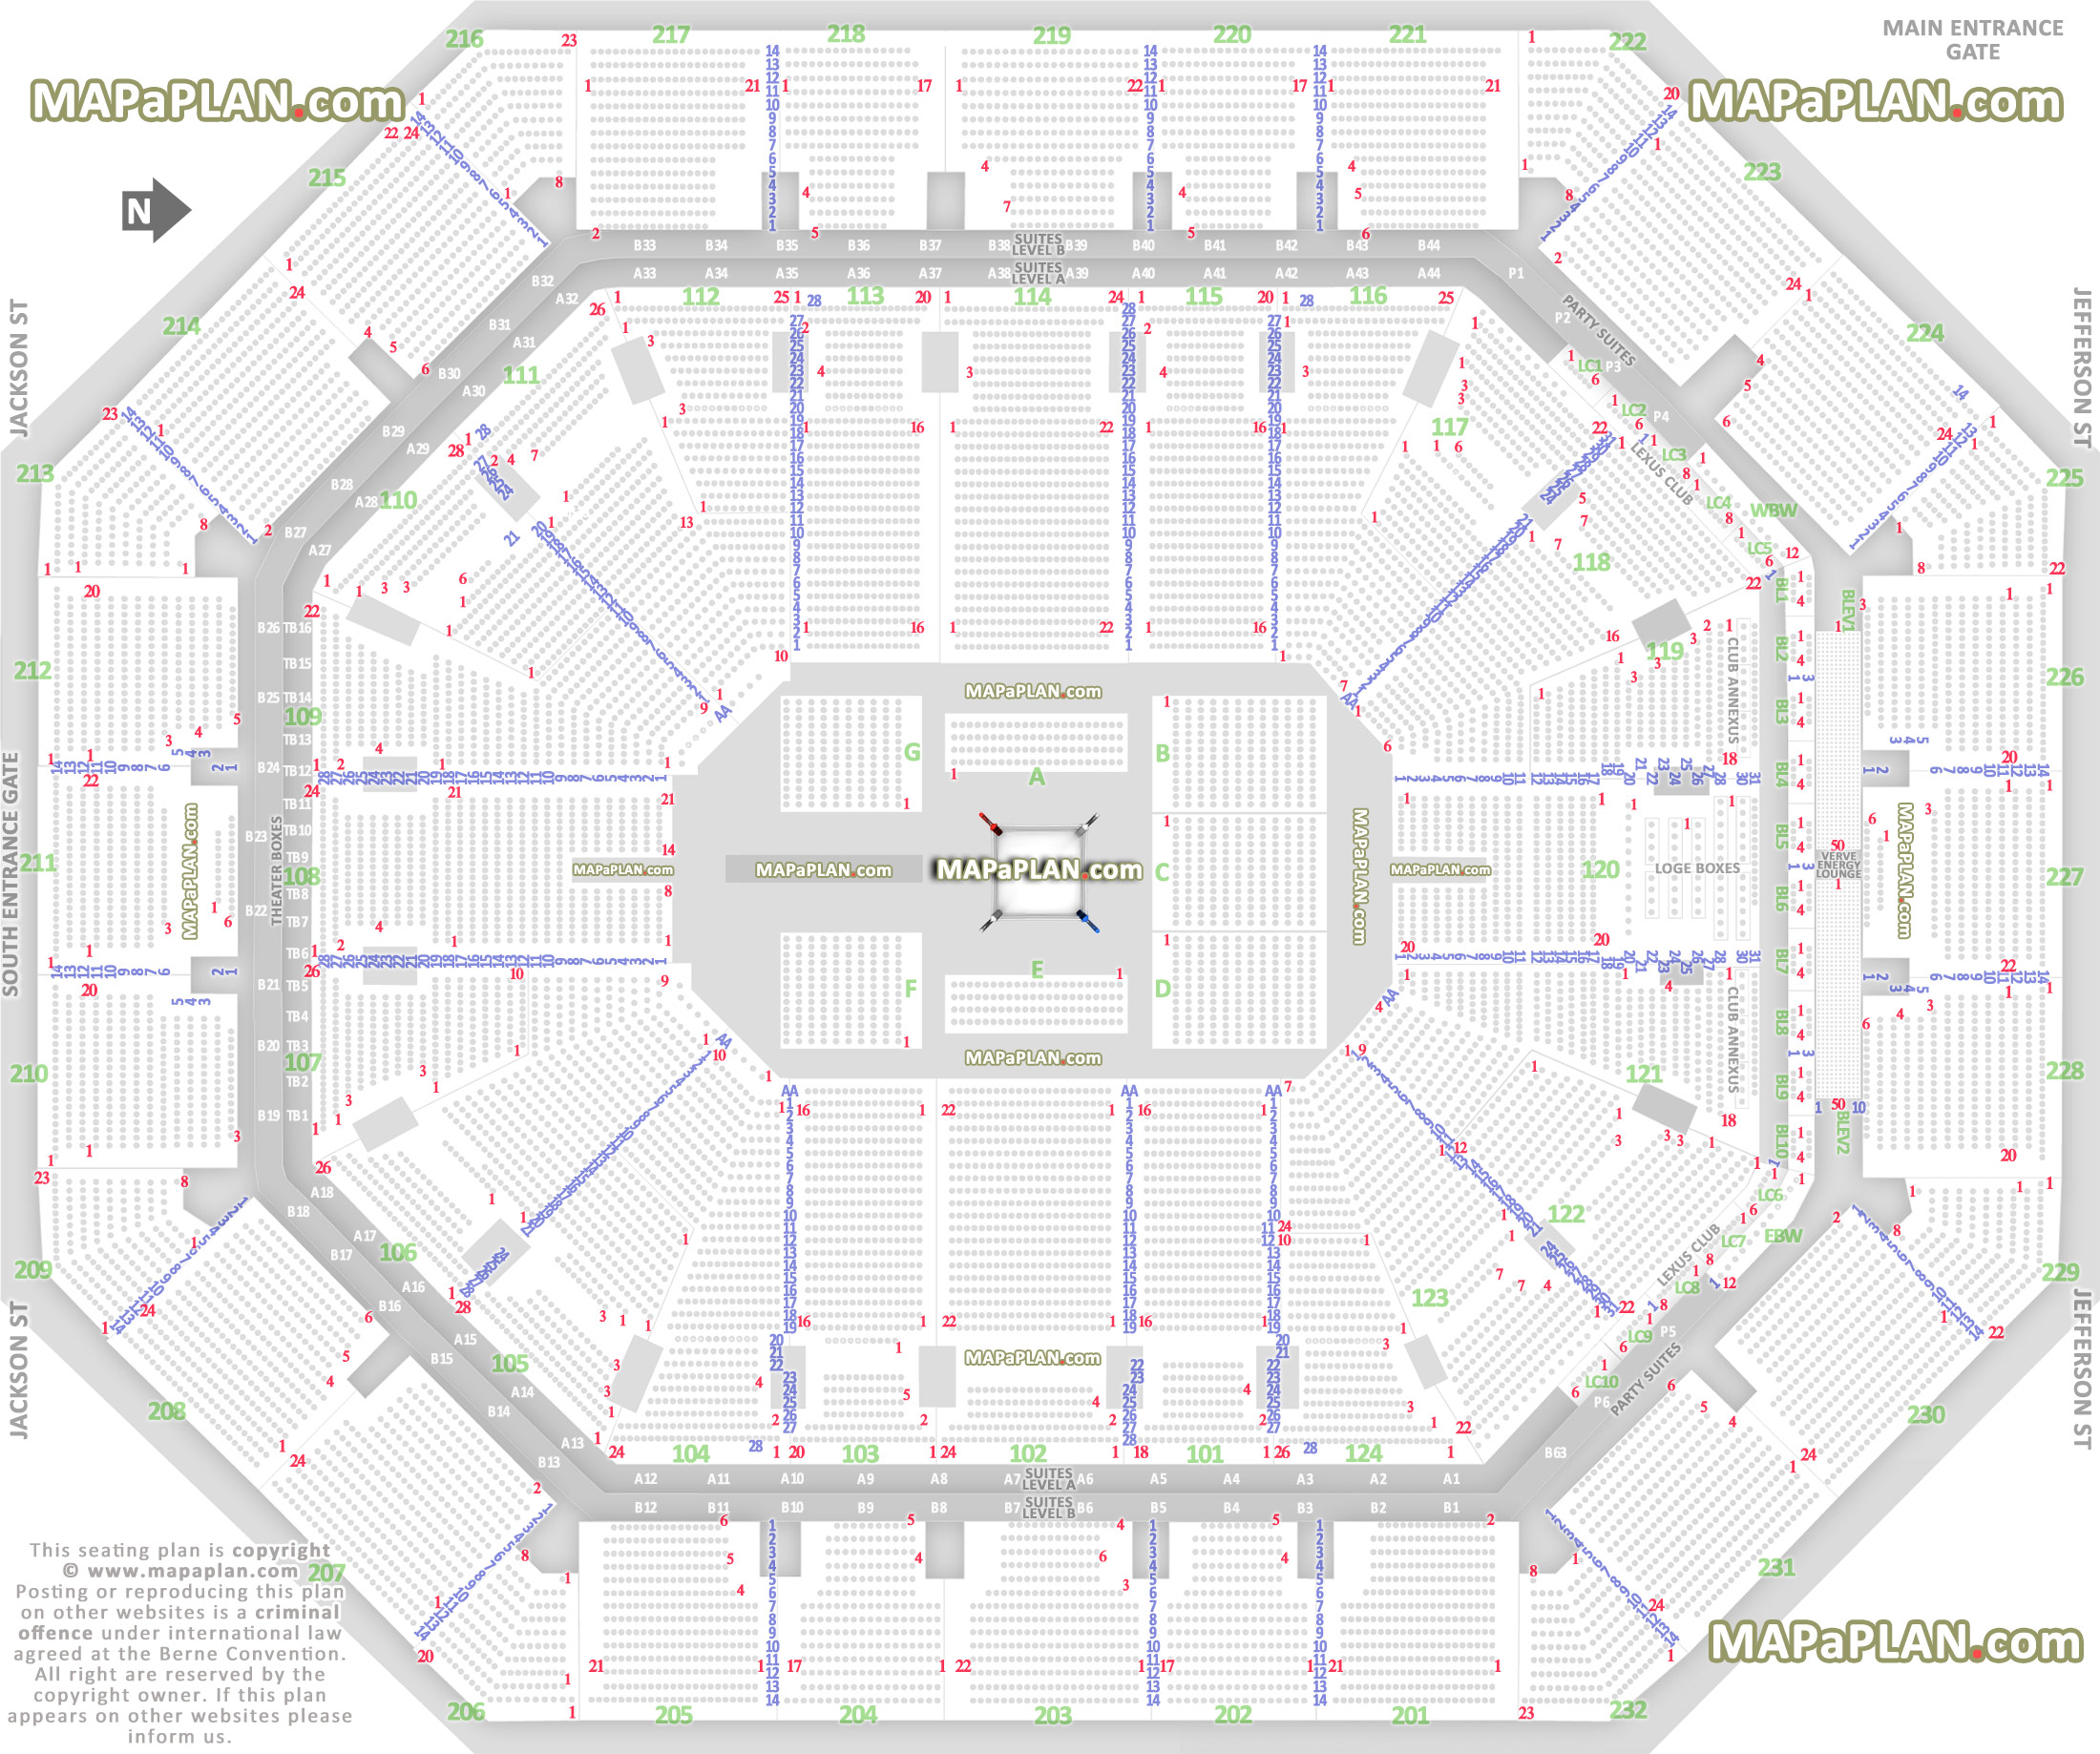 wwe raw smackdown live wrestling boxing match events 360 round ring stage configuration good bad worst side seats Phoenix Talking Stick Resort Arena seating chart